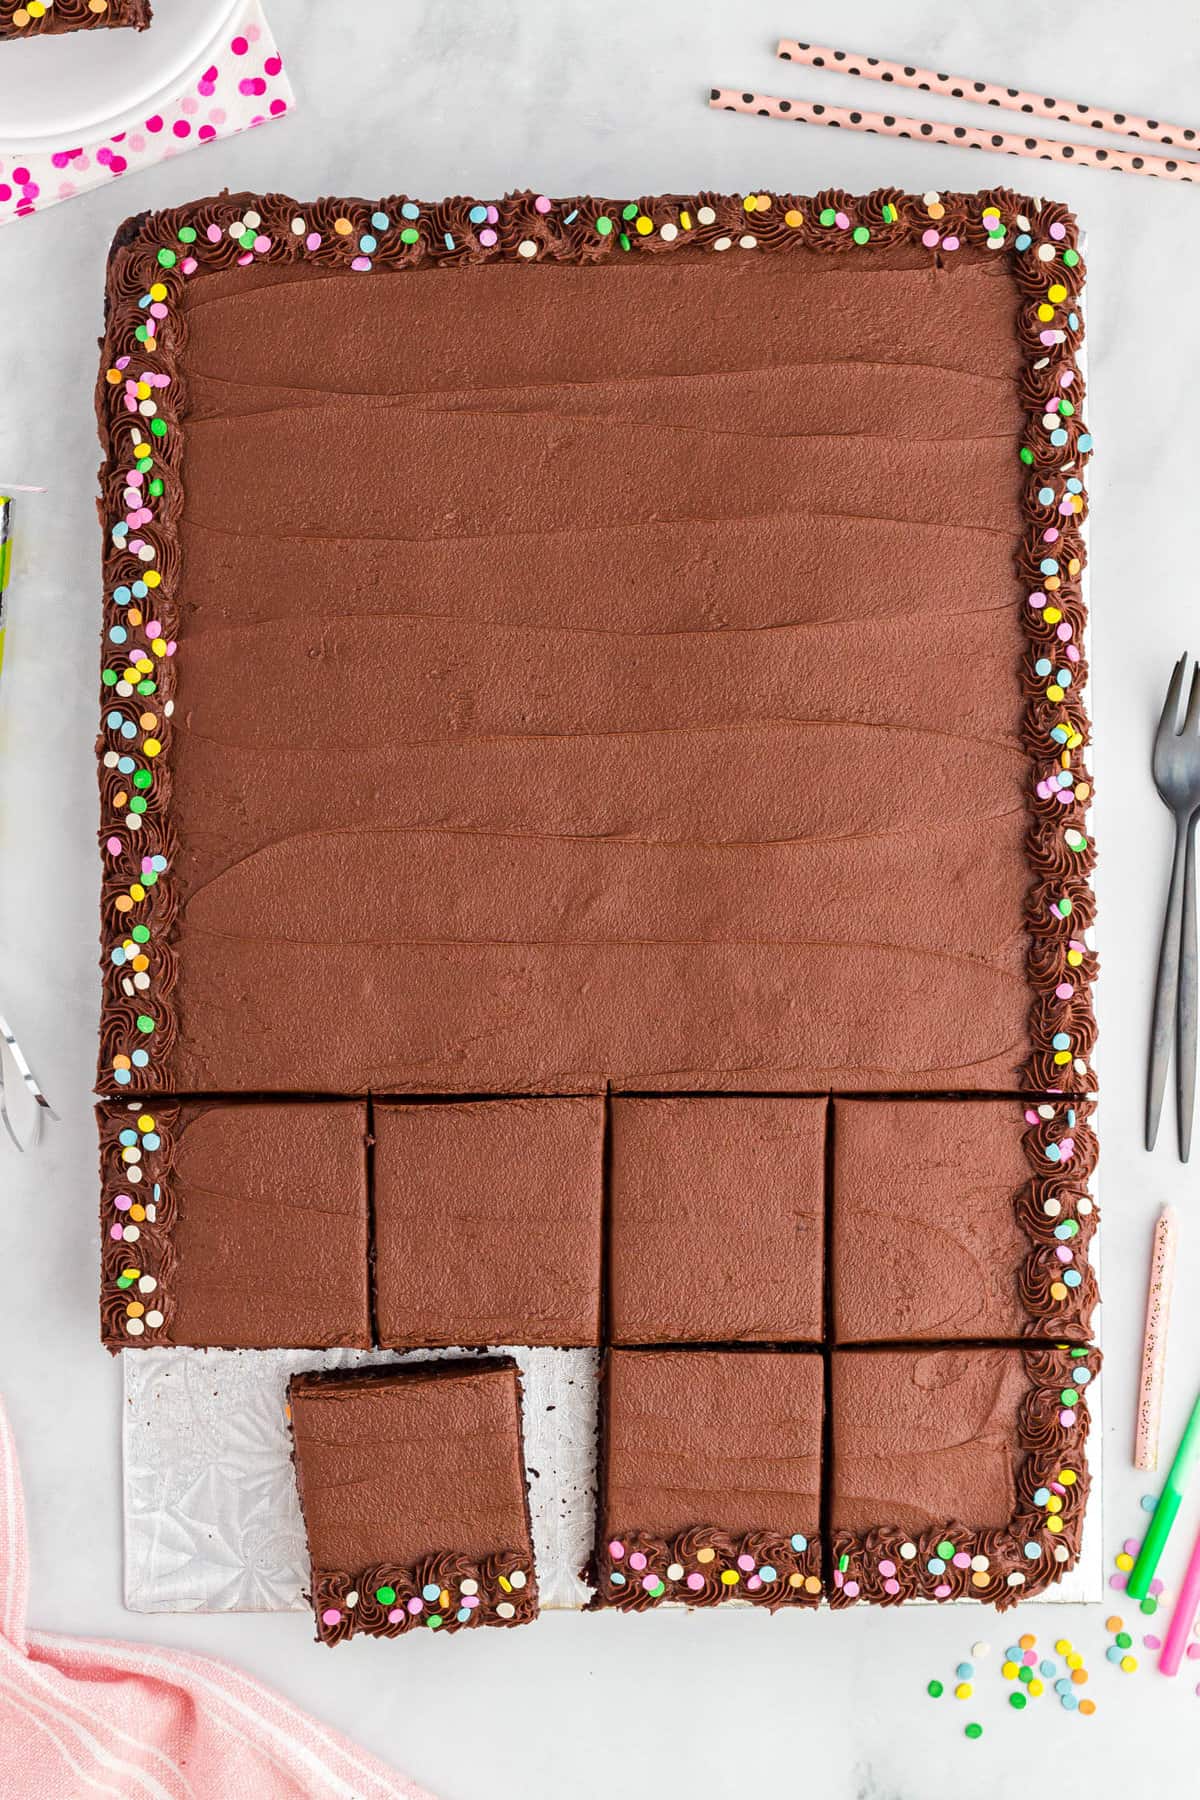 Perfectly Frosted Chocolate Sheet Cake with Sprinkle Accents